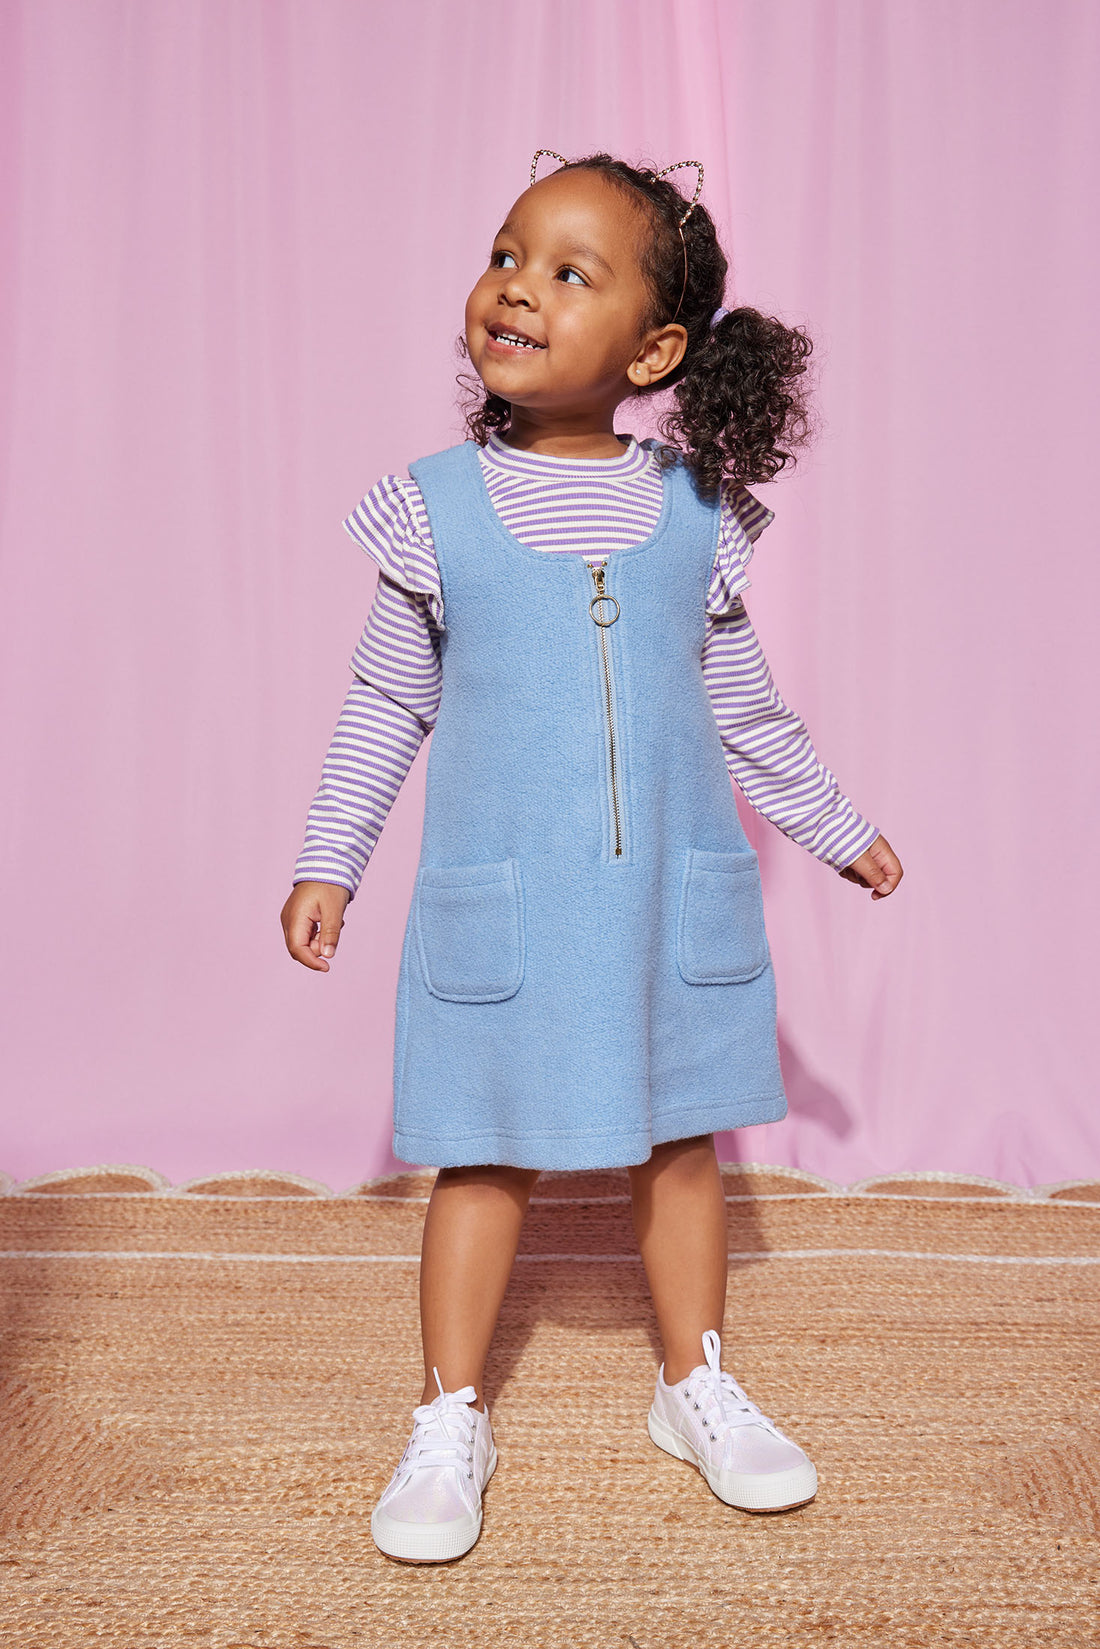 Model can be seen wearing our Sadie Top in Lilac Sparkle Stripe layered underneath our Retro Sherpa Jumper in Light Blue--BISBY girl